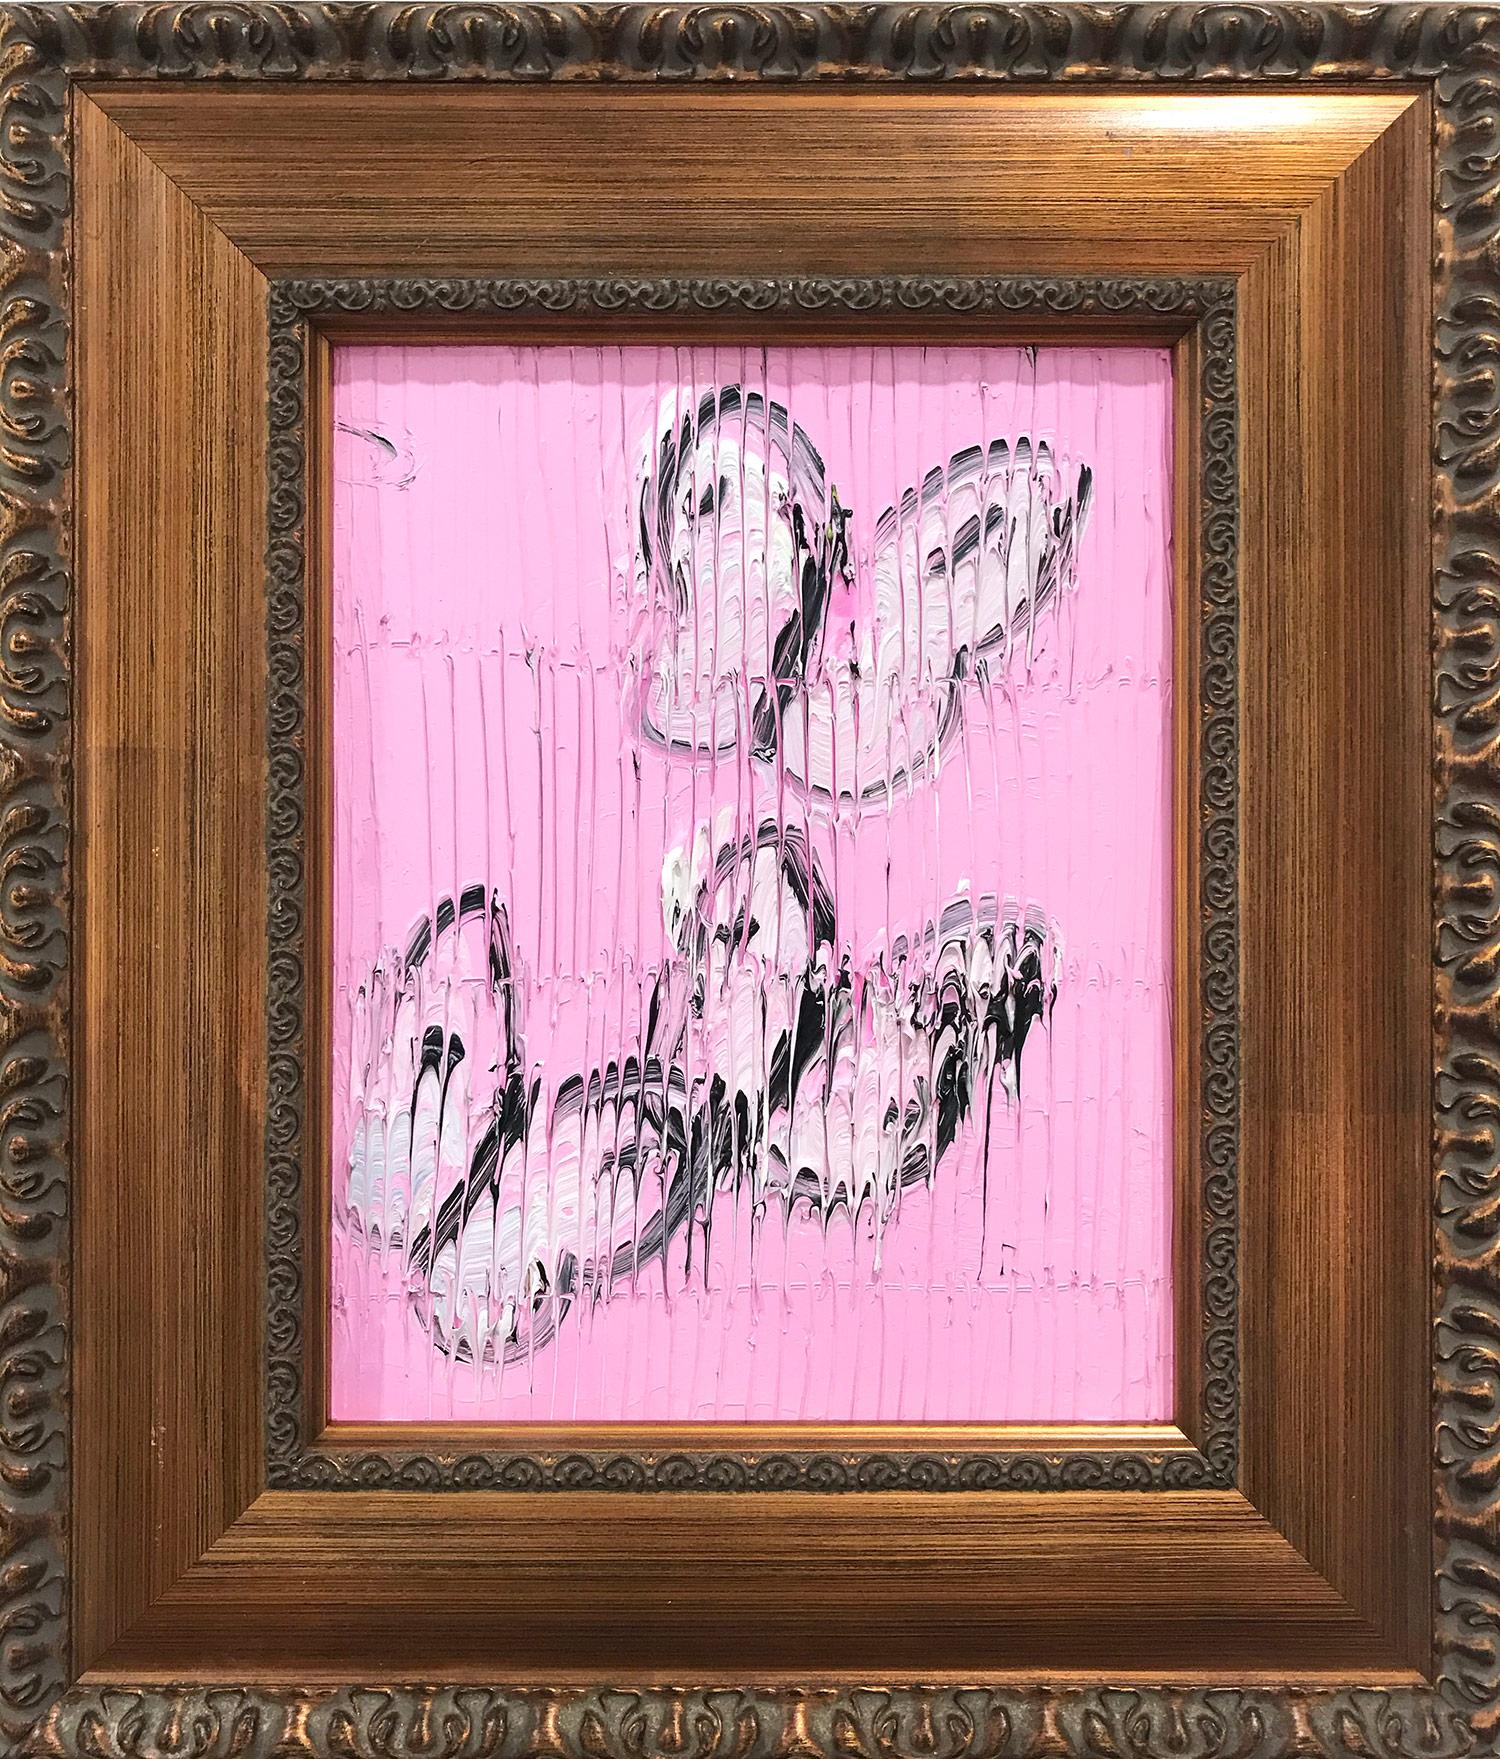 Hunt Slonem Animal Painting - "Untitled" (White Butterflies on Pink Background with Scoring)